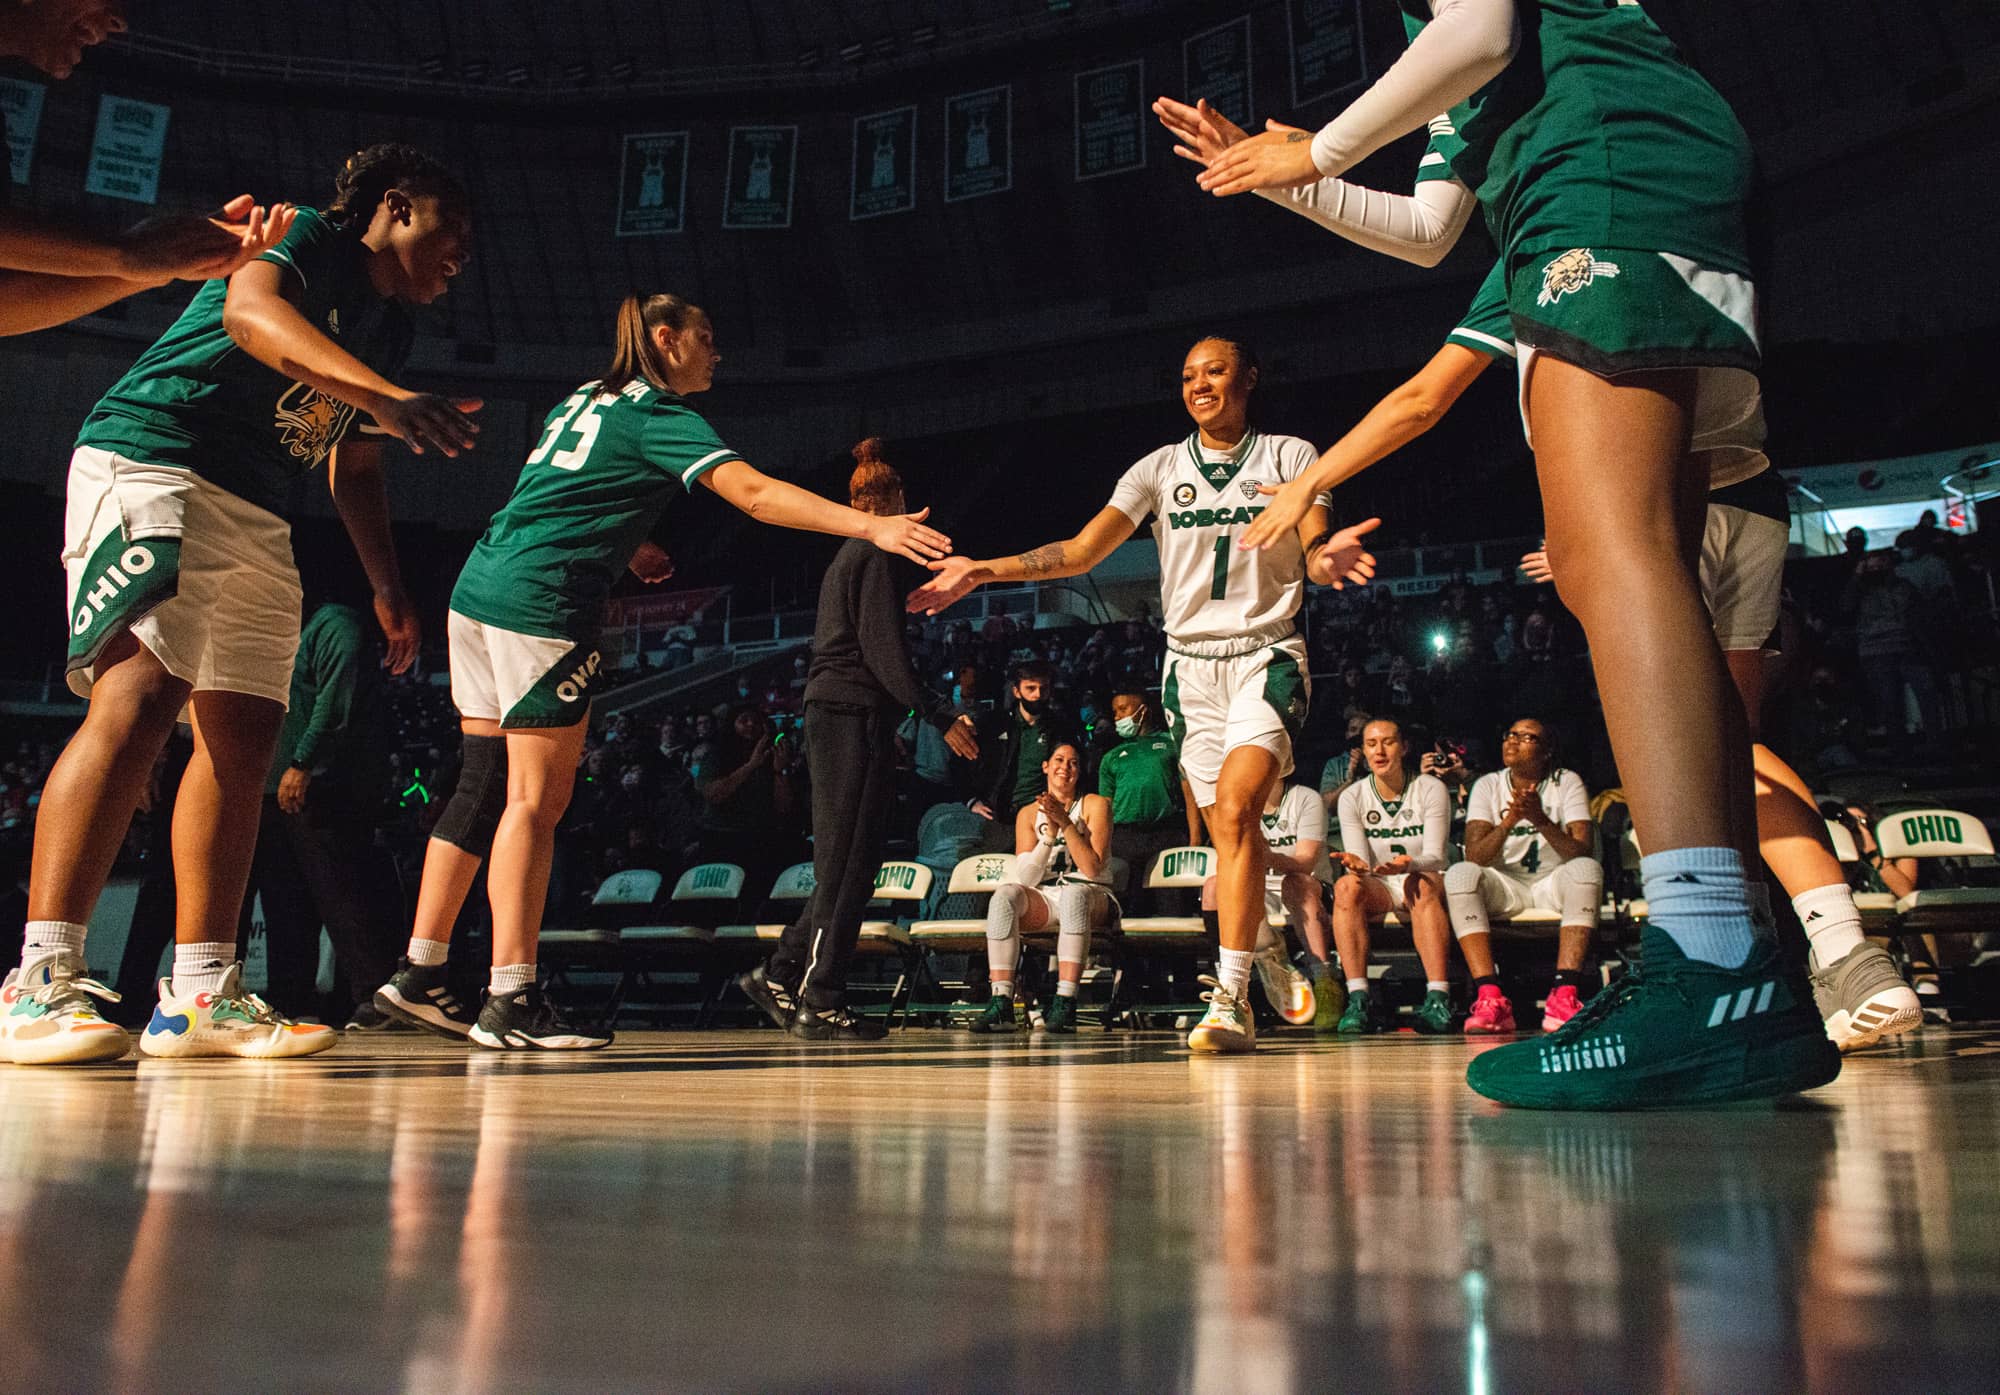 CeCe walking onto a basketball court giving high-fives to her teammates